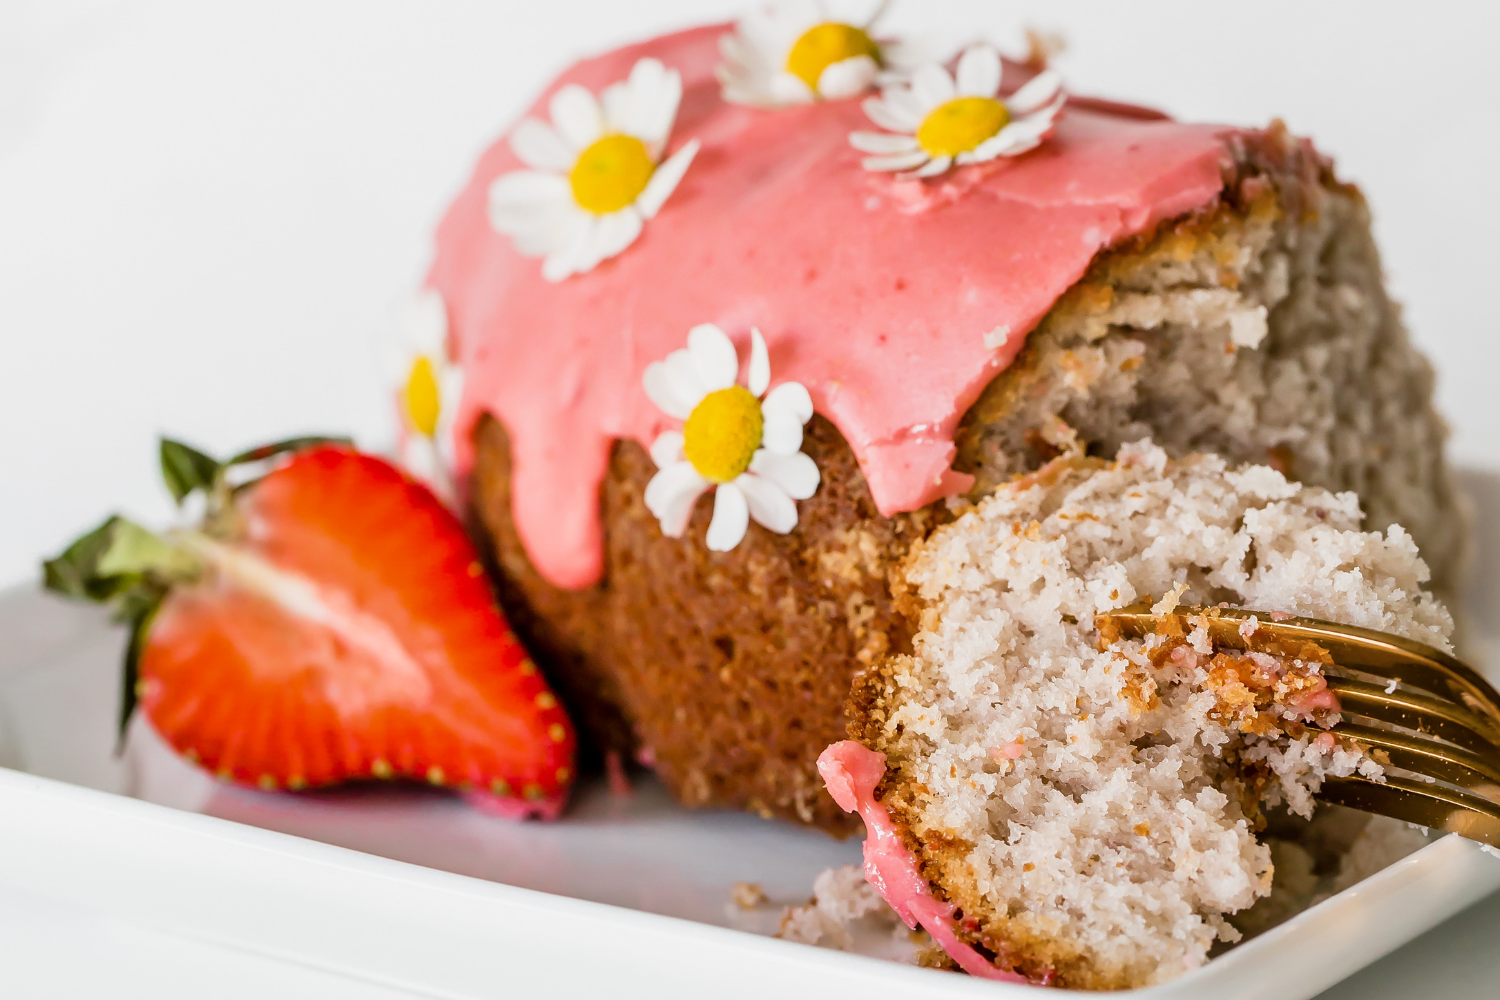 strawberry bundt cake on a white plate with a fork and a sliced fresh strawberry next to it.